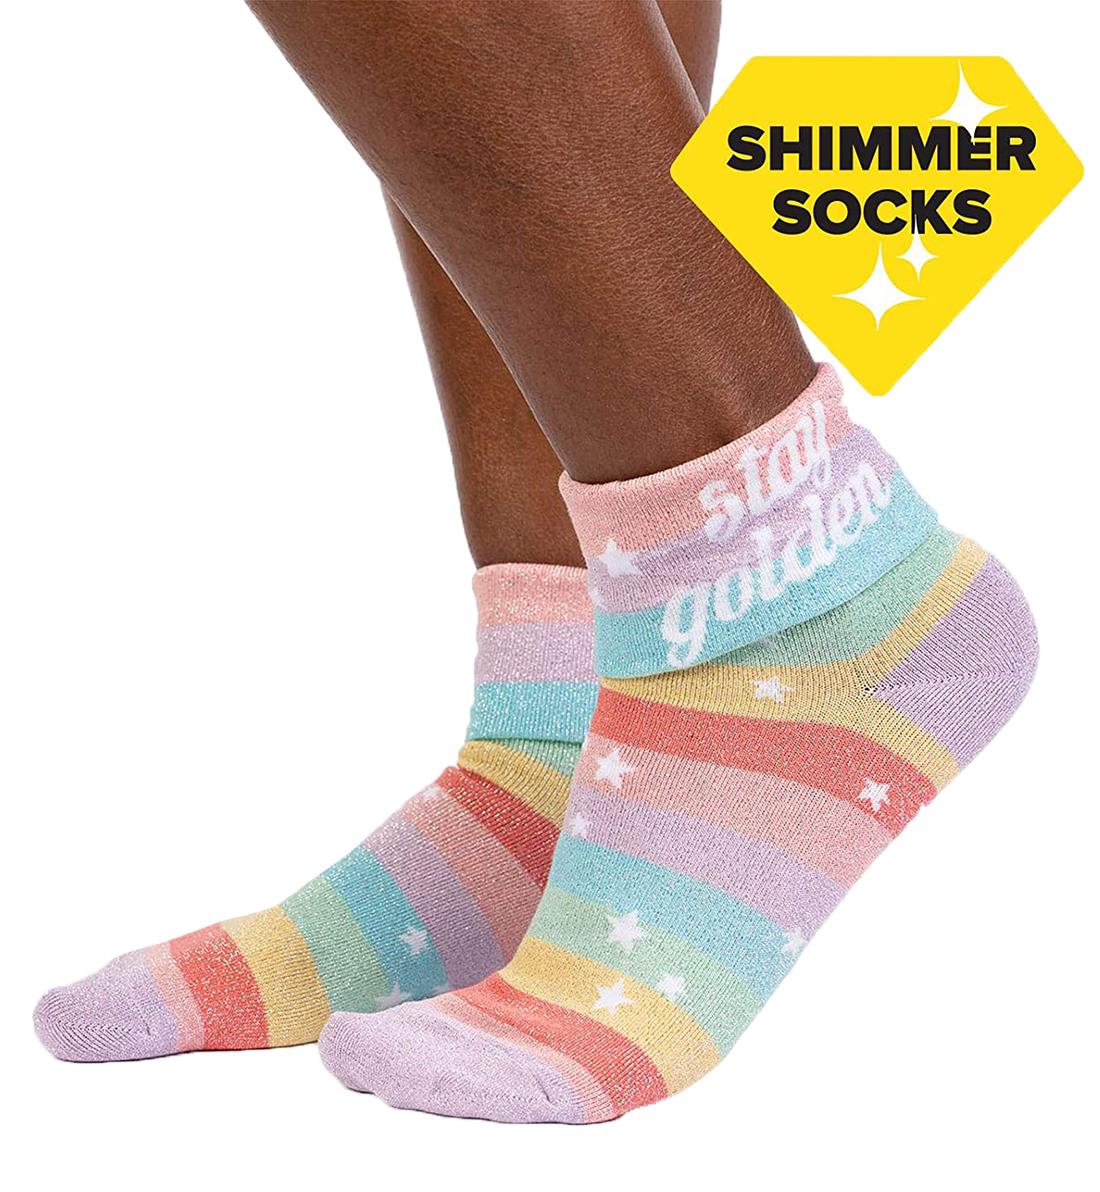 SOCK it to me 2-Way Turn Cuff Crew Socks (q0001),Stay Golden - Stay Golden,One Size